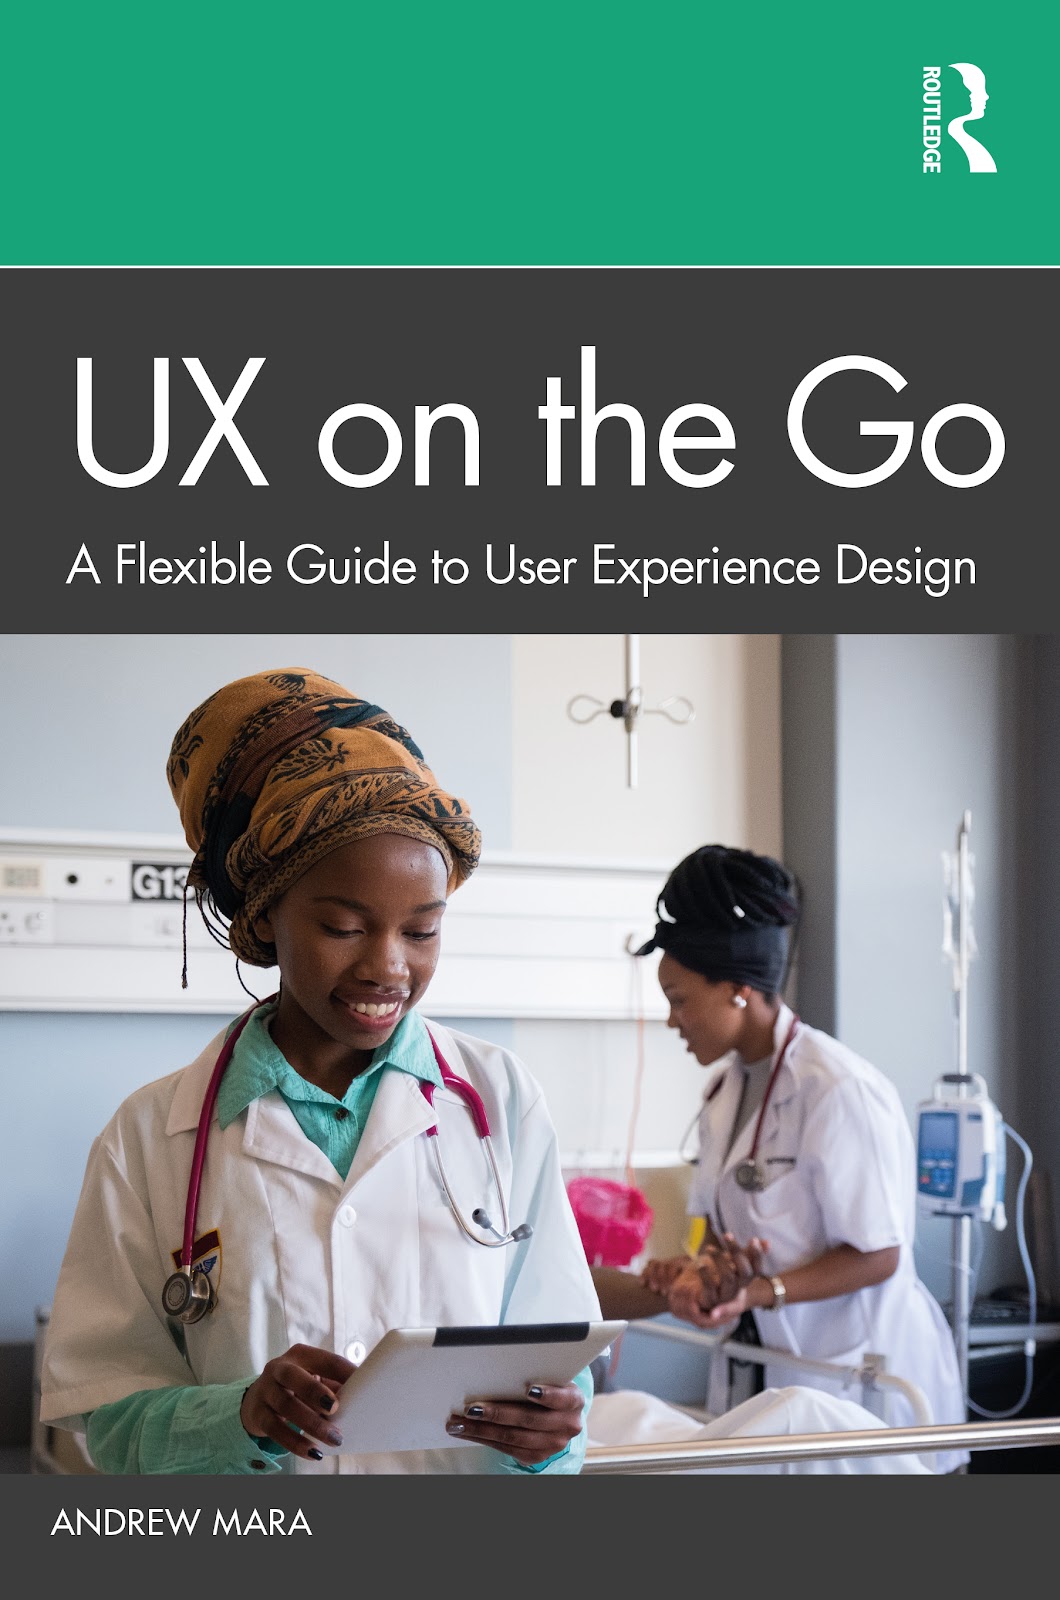 Book cover of "UX on the Go: A Flexible Guide to User Experience Design"